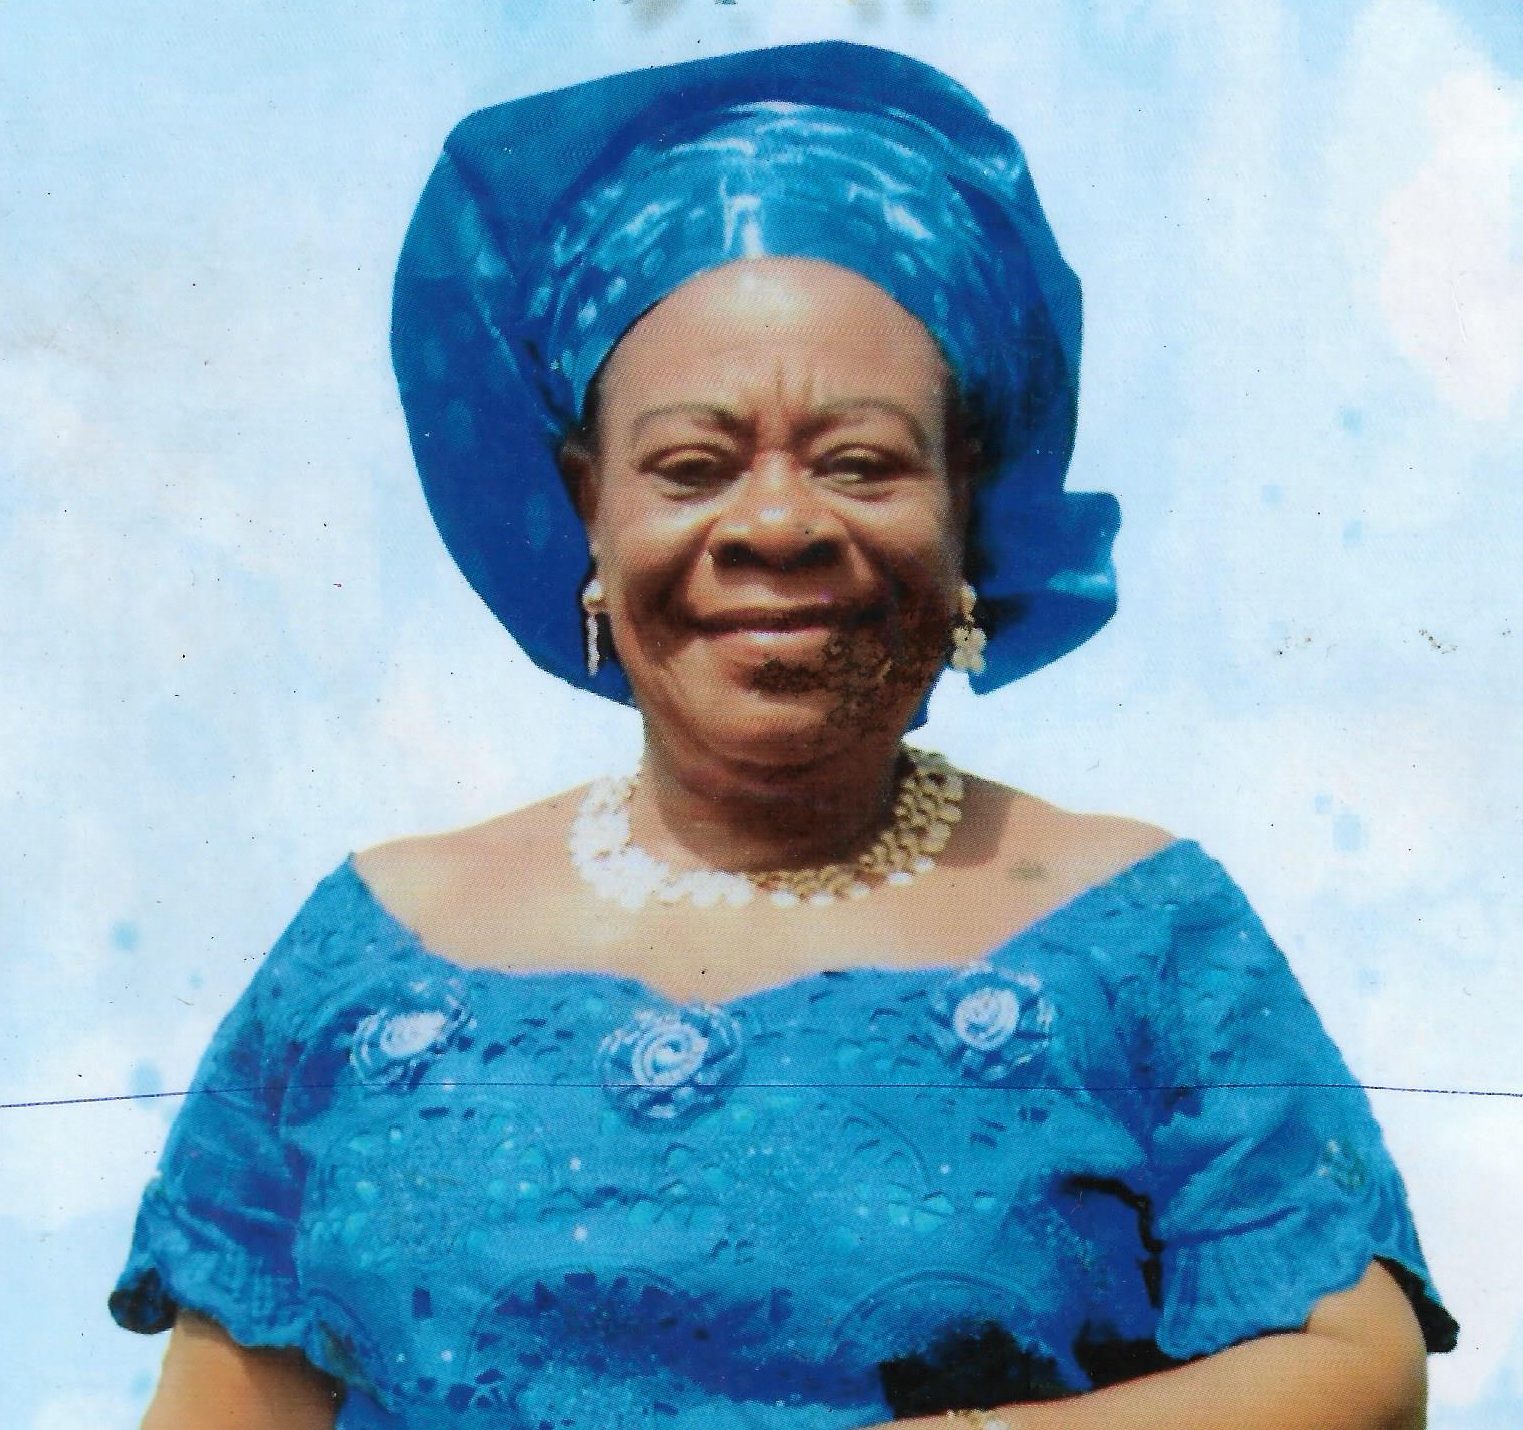 During-the-interment LATE EZINNE VICTORIA OBIAGELI ONYEKPEZE LAID TO REST